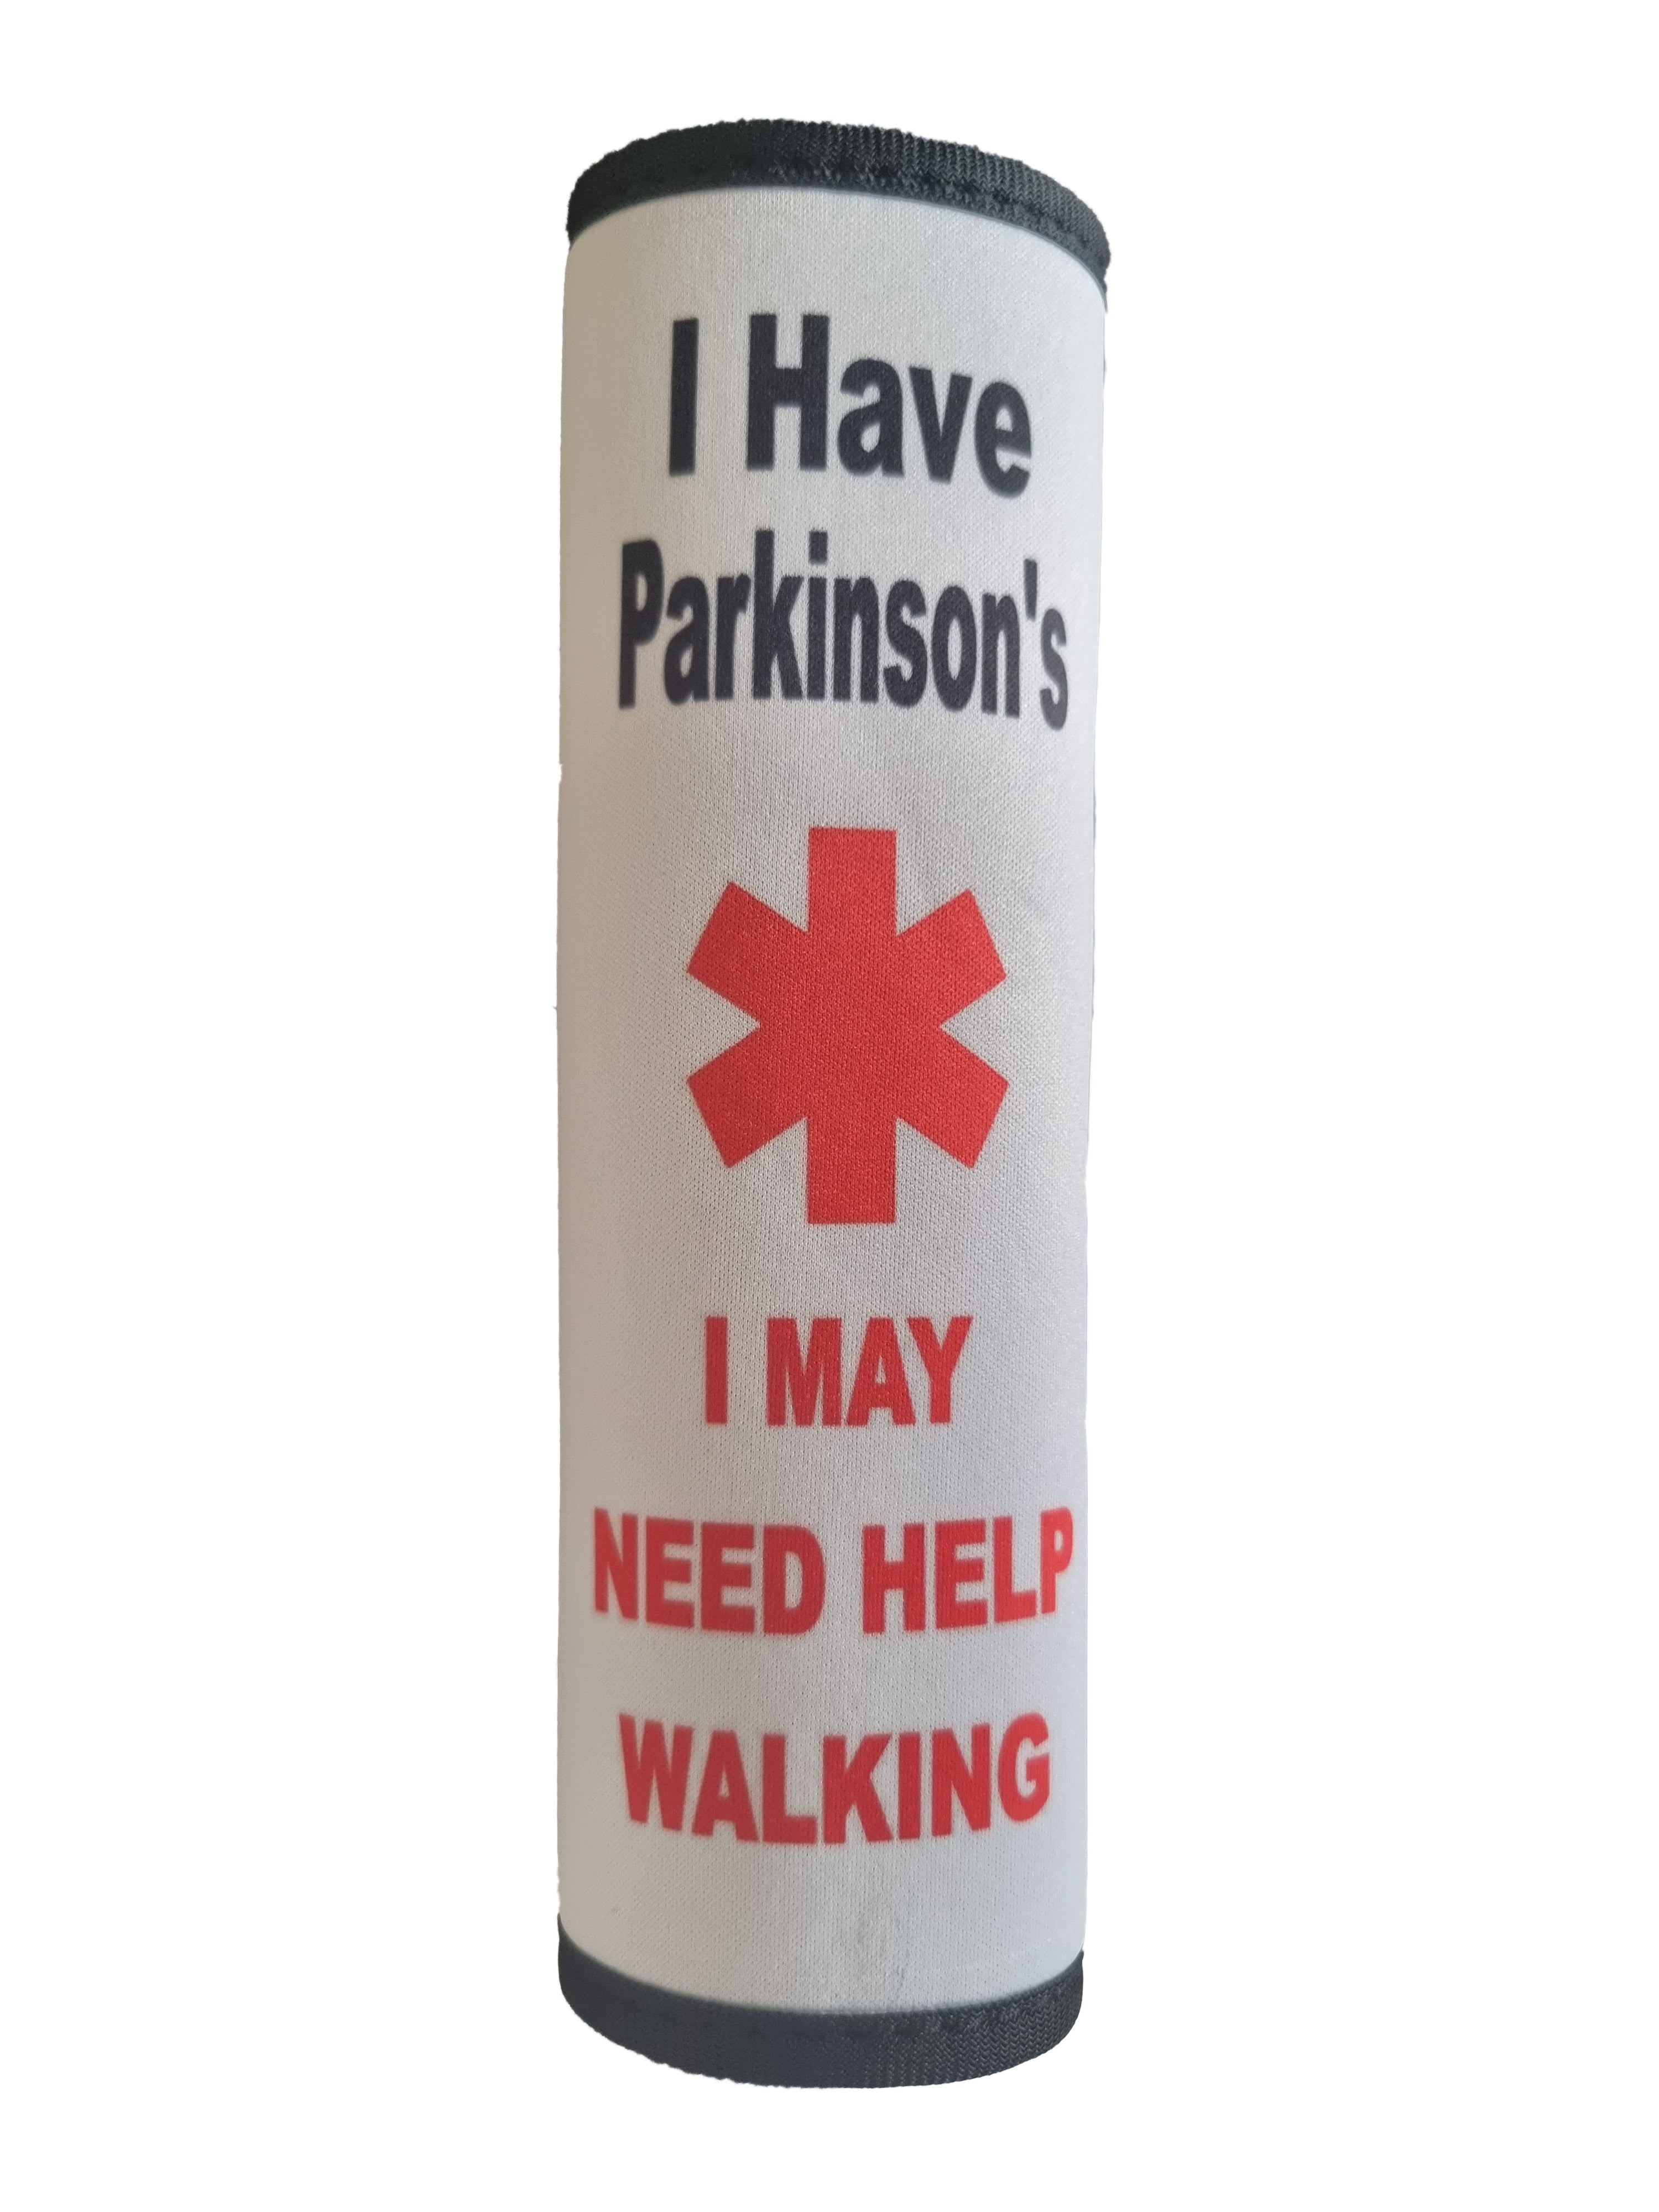 I have Parkinson's and may need help walking